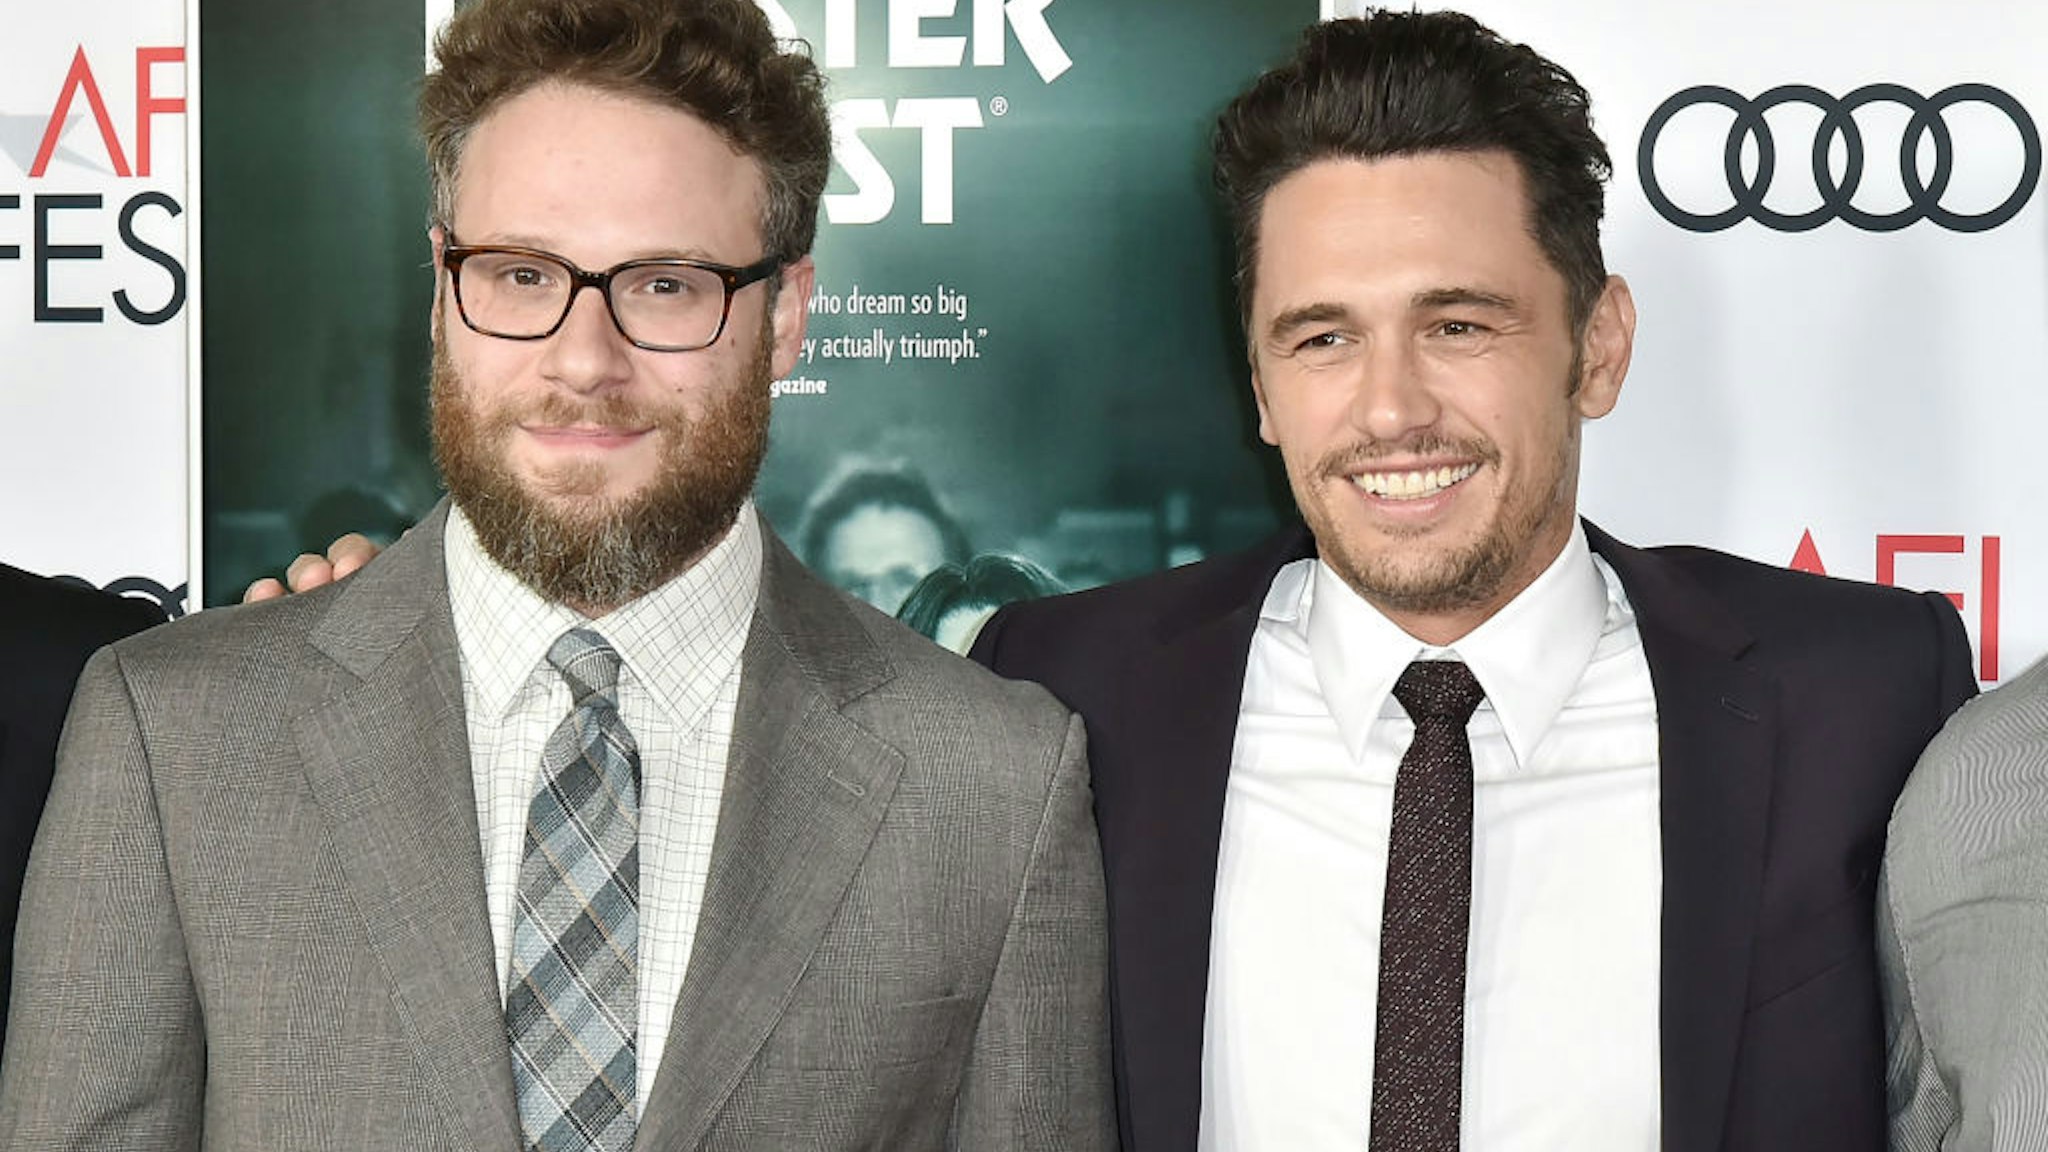 HOLLYWOOD, CA - NOVEMBER 12: Seth Rogen and James Franco attend the AFI FEST 2017 Presented By Audi - Screening Of "The Disaster Artist" - Arrivals at TCL Chinese Theatre on November 12, 2017 in Hollywood, California. (Photo by David Crotty/Patrick McMullan via Getty Images)